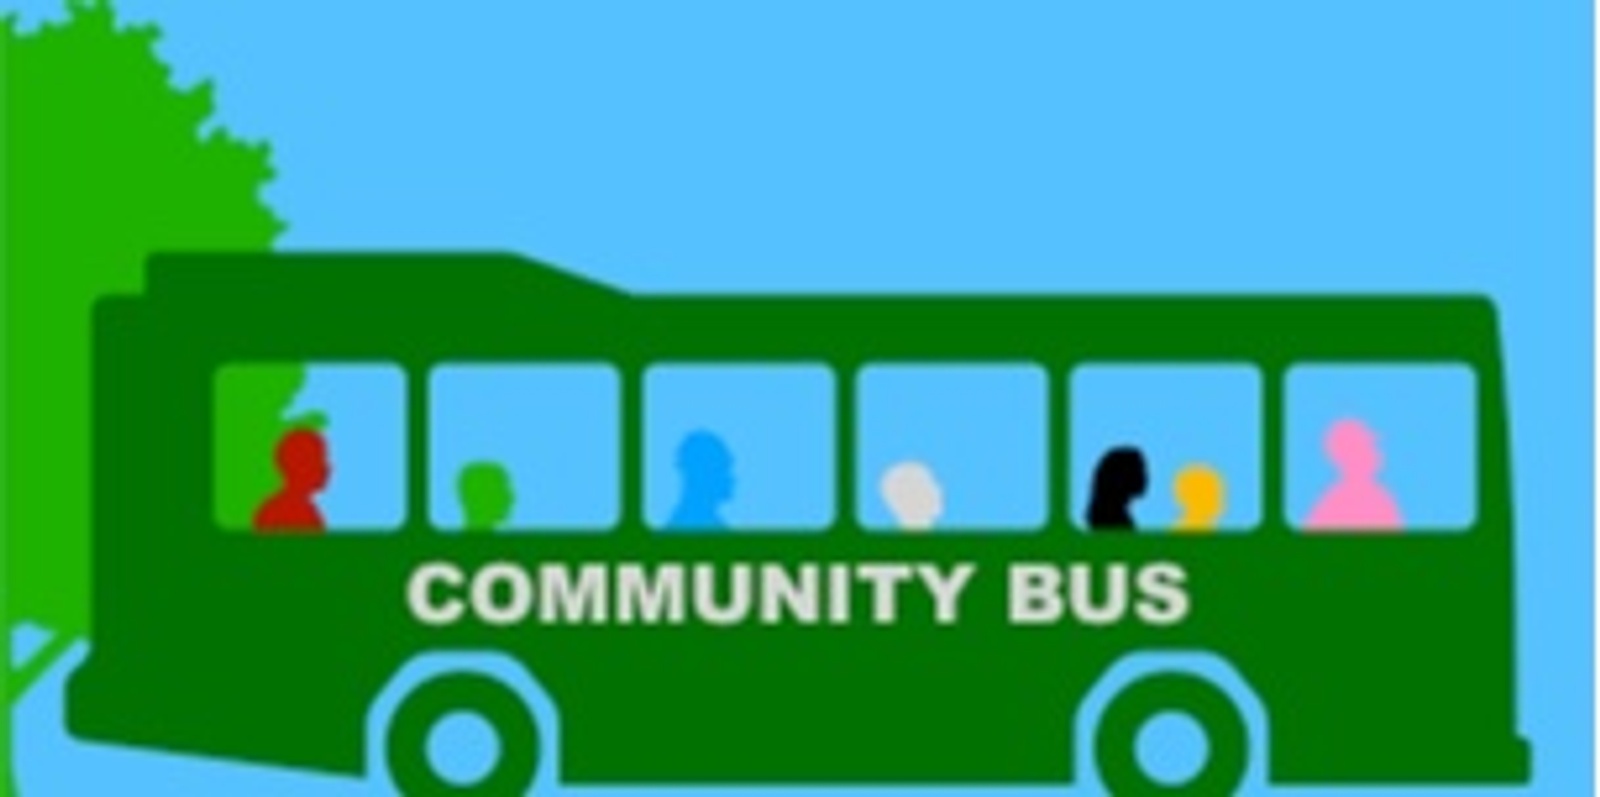 Banner image for Mudgee Connect Bus